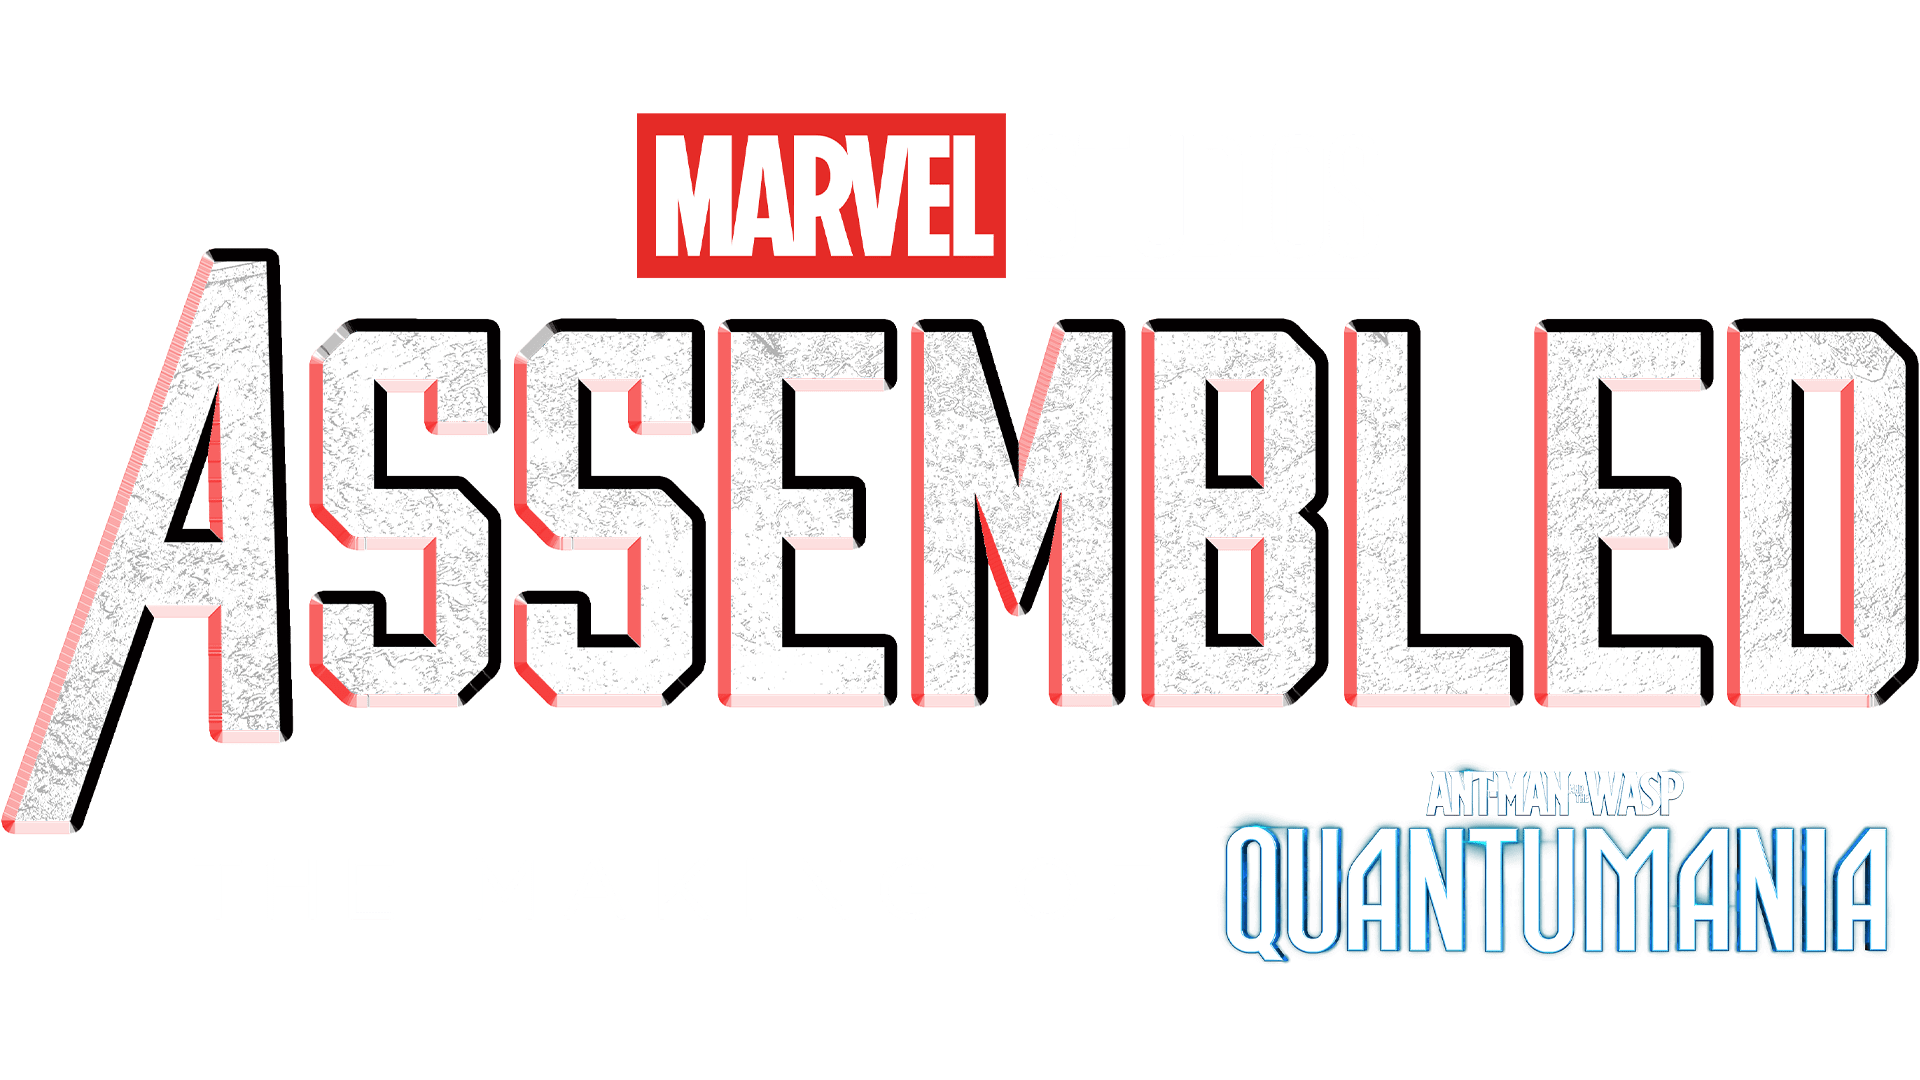 Watch Assembled: The Making of Ant-Man and the Wasp: Quantumania